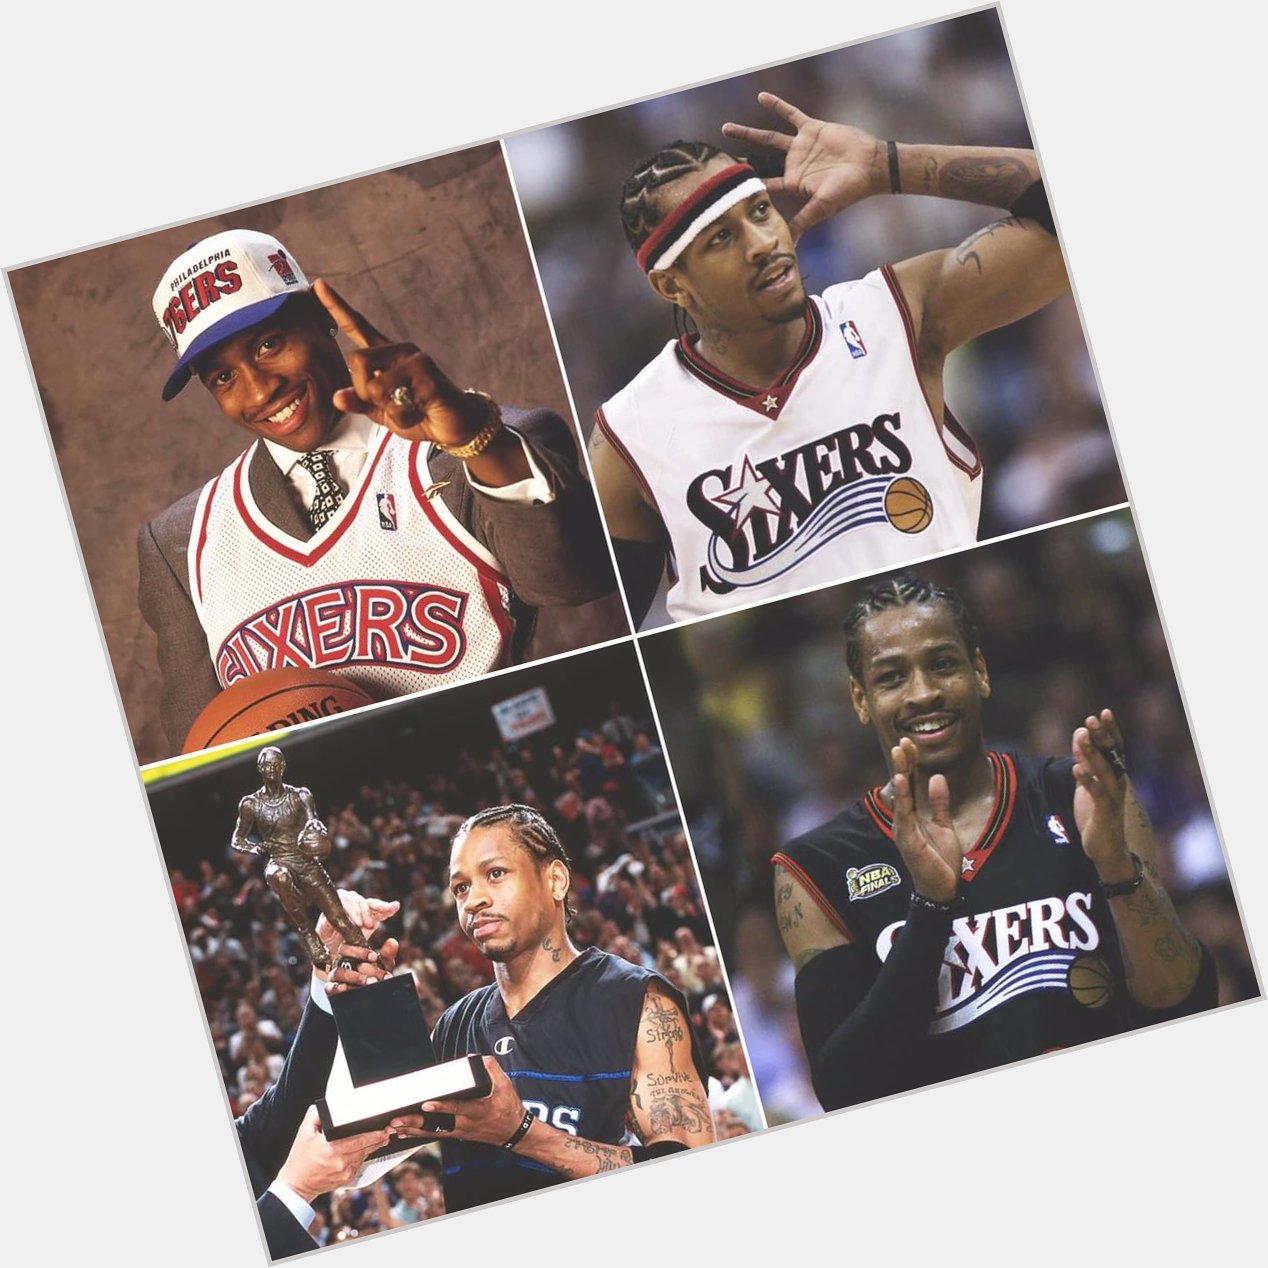 Allen Iverson. The most exciting basketball player to watch, the answer, The GOAT. Happy birthday. 